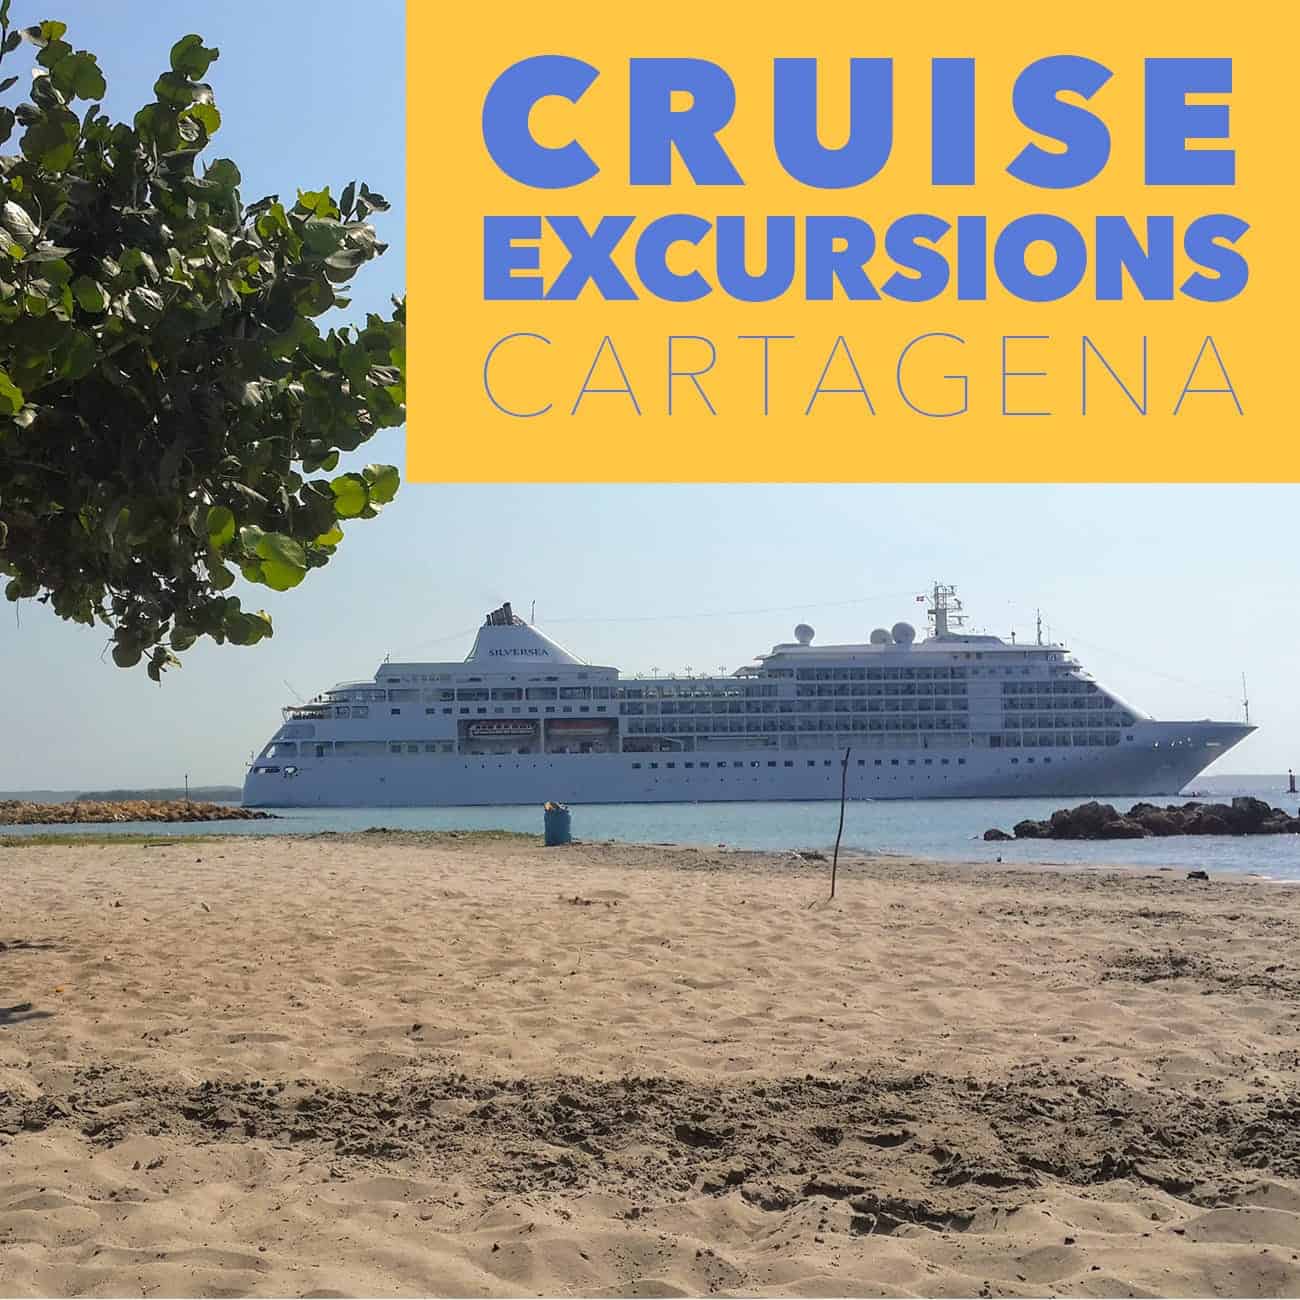 37++ Best cruise ship excursions at cartagena colombia information